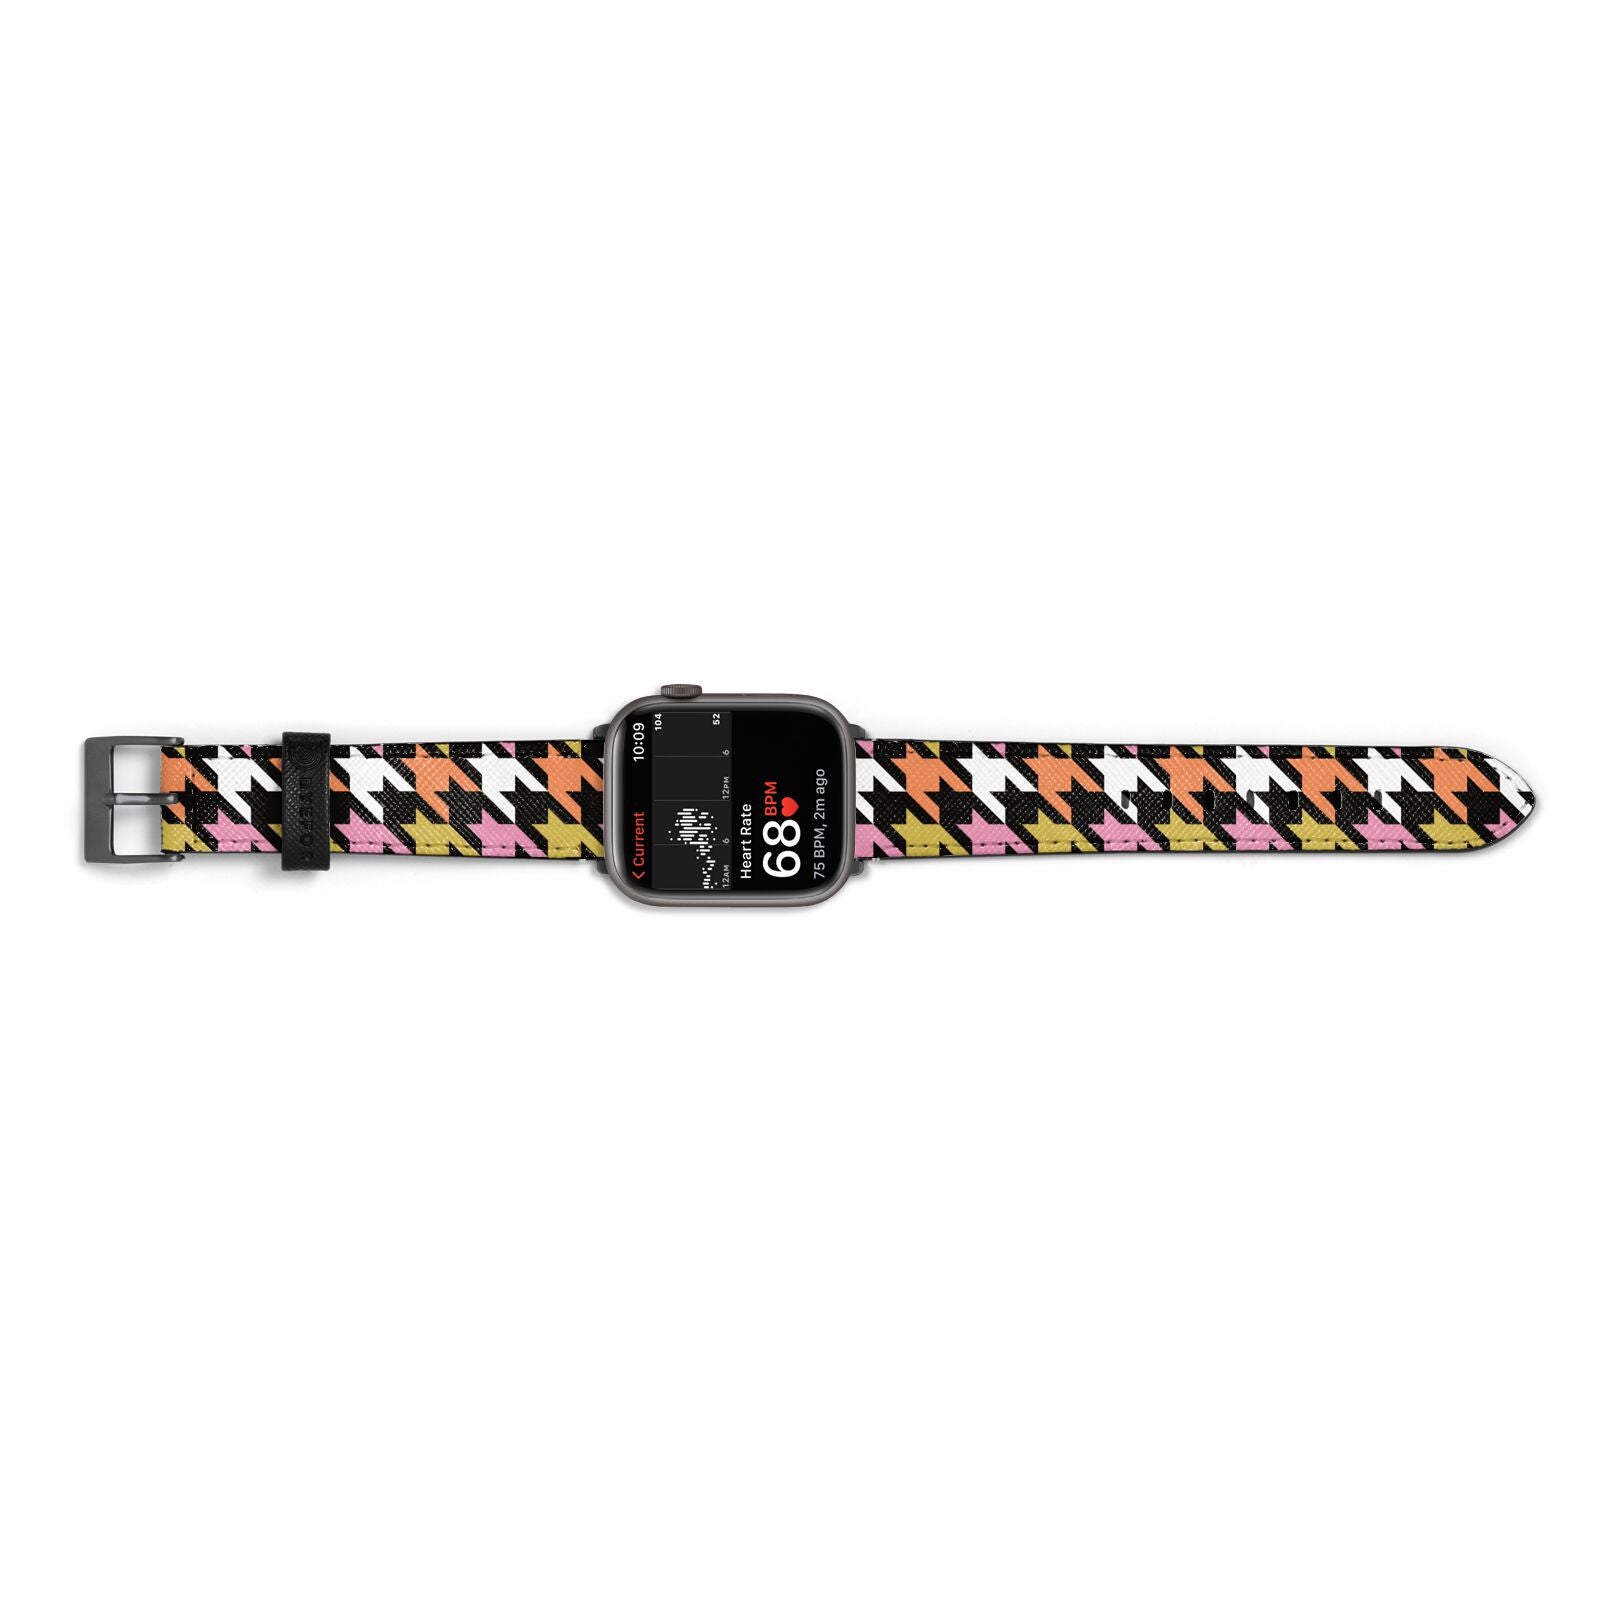 Retro Houndstooth Apple Watch Strap Size 38mm Landscape Image Space Grey Hardware